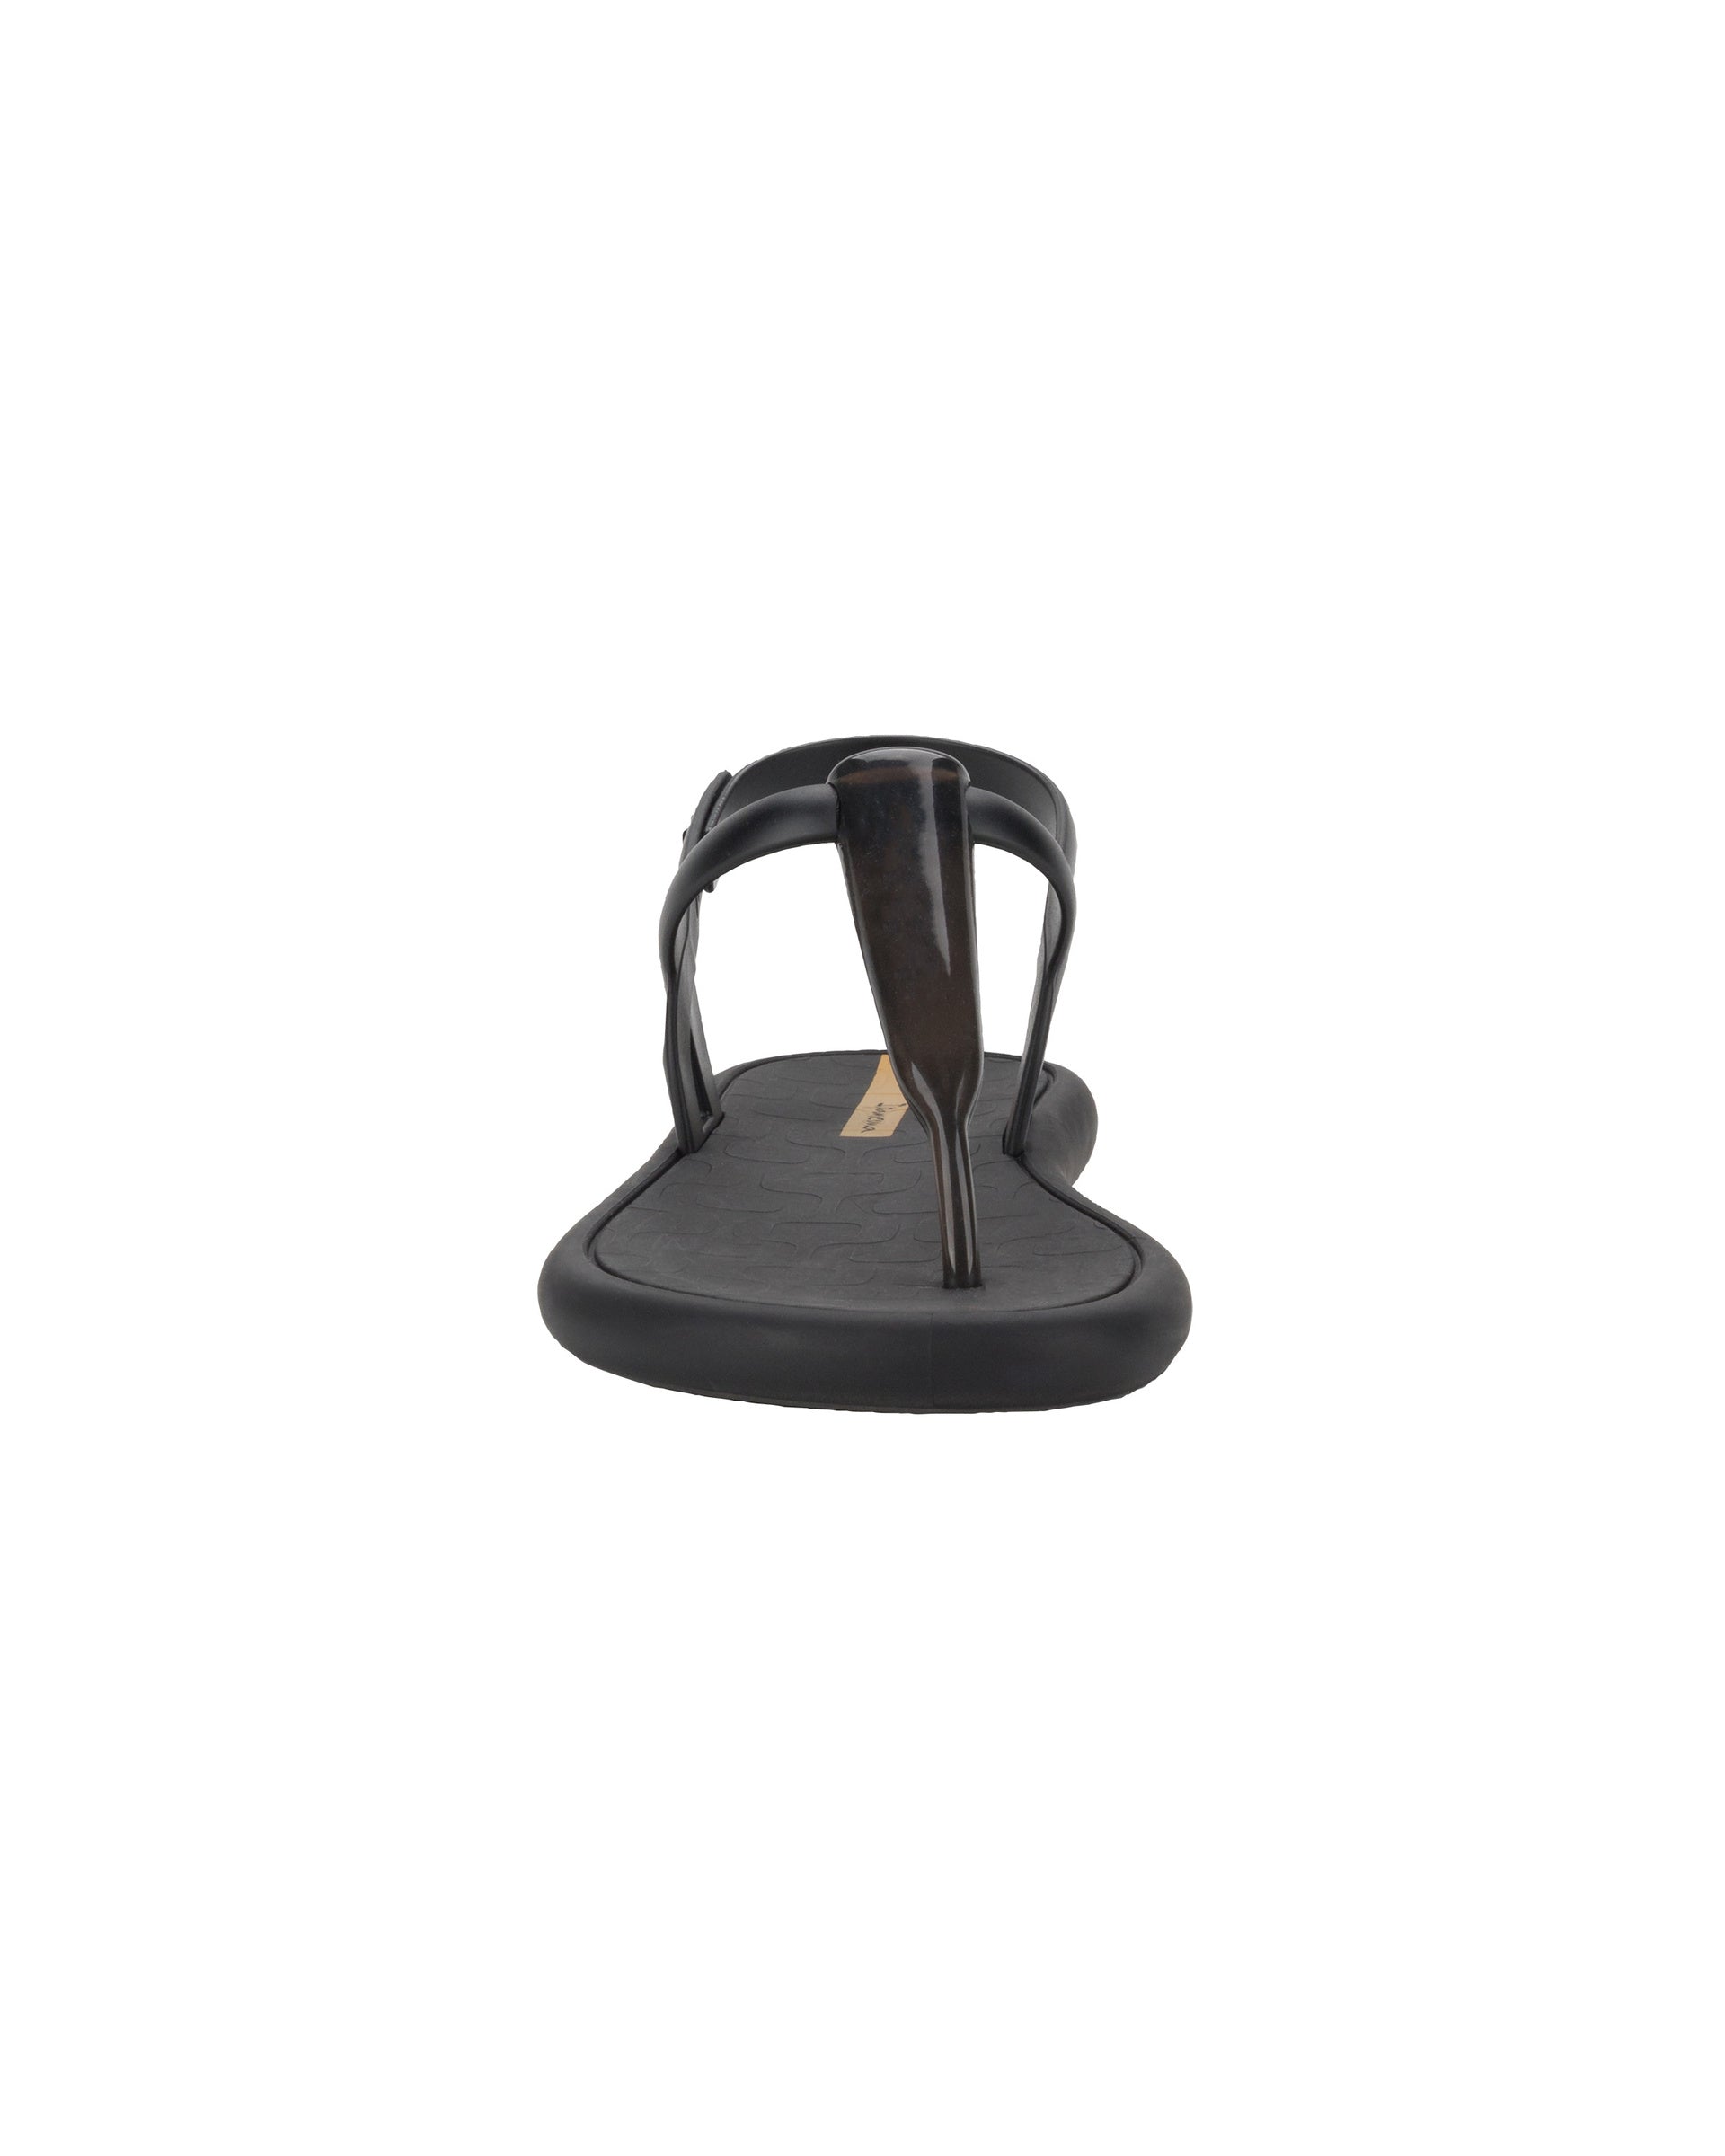 Front view of a black Ipanema Glossy women's t-strap sandal.